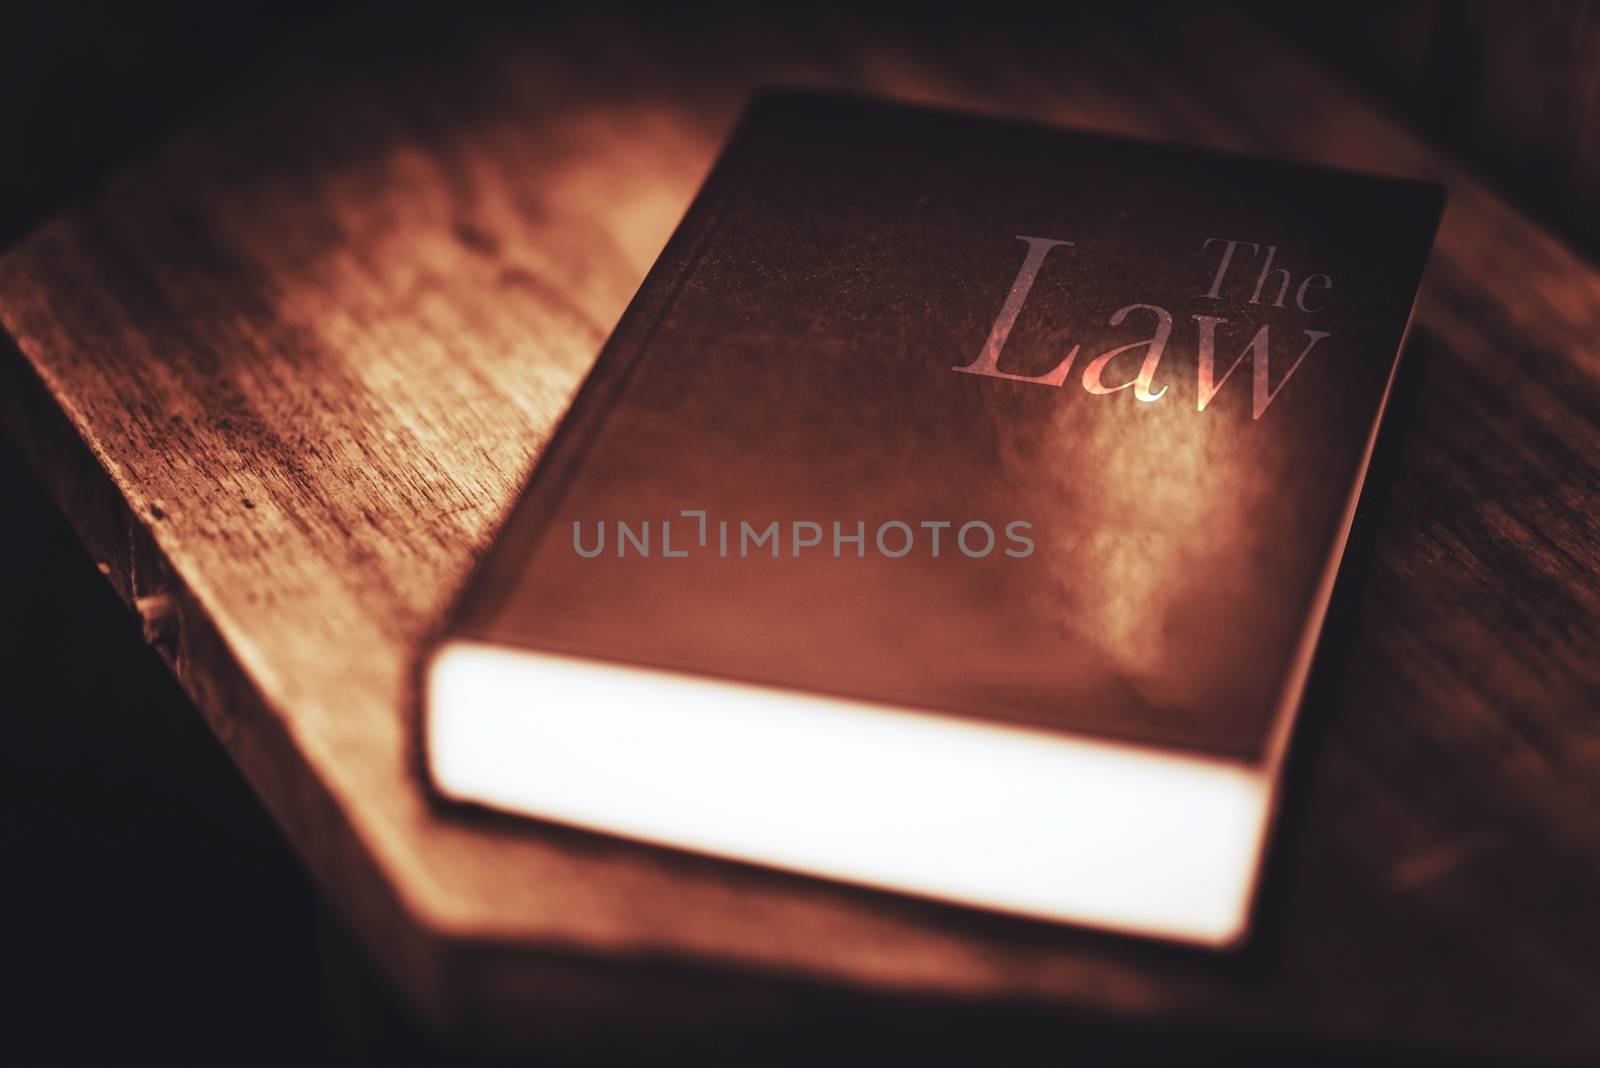 The Book of Law by welcomia